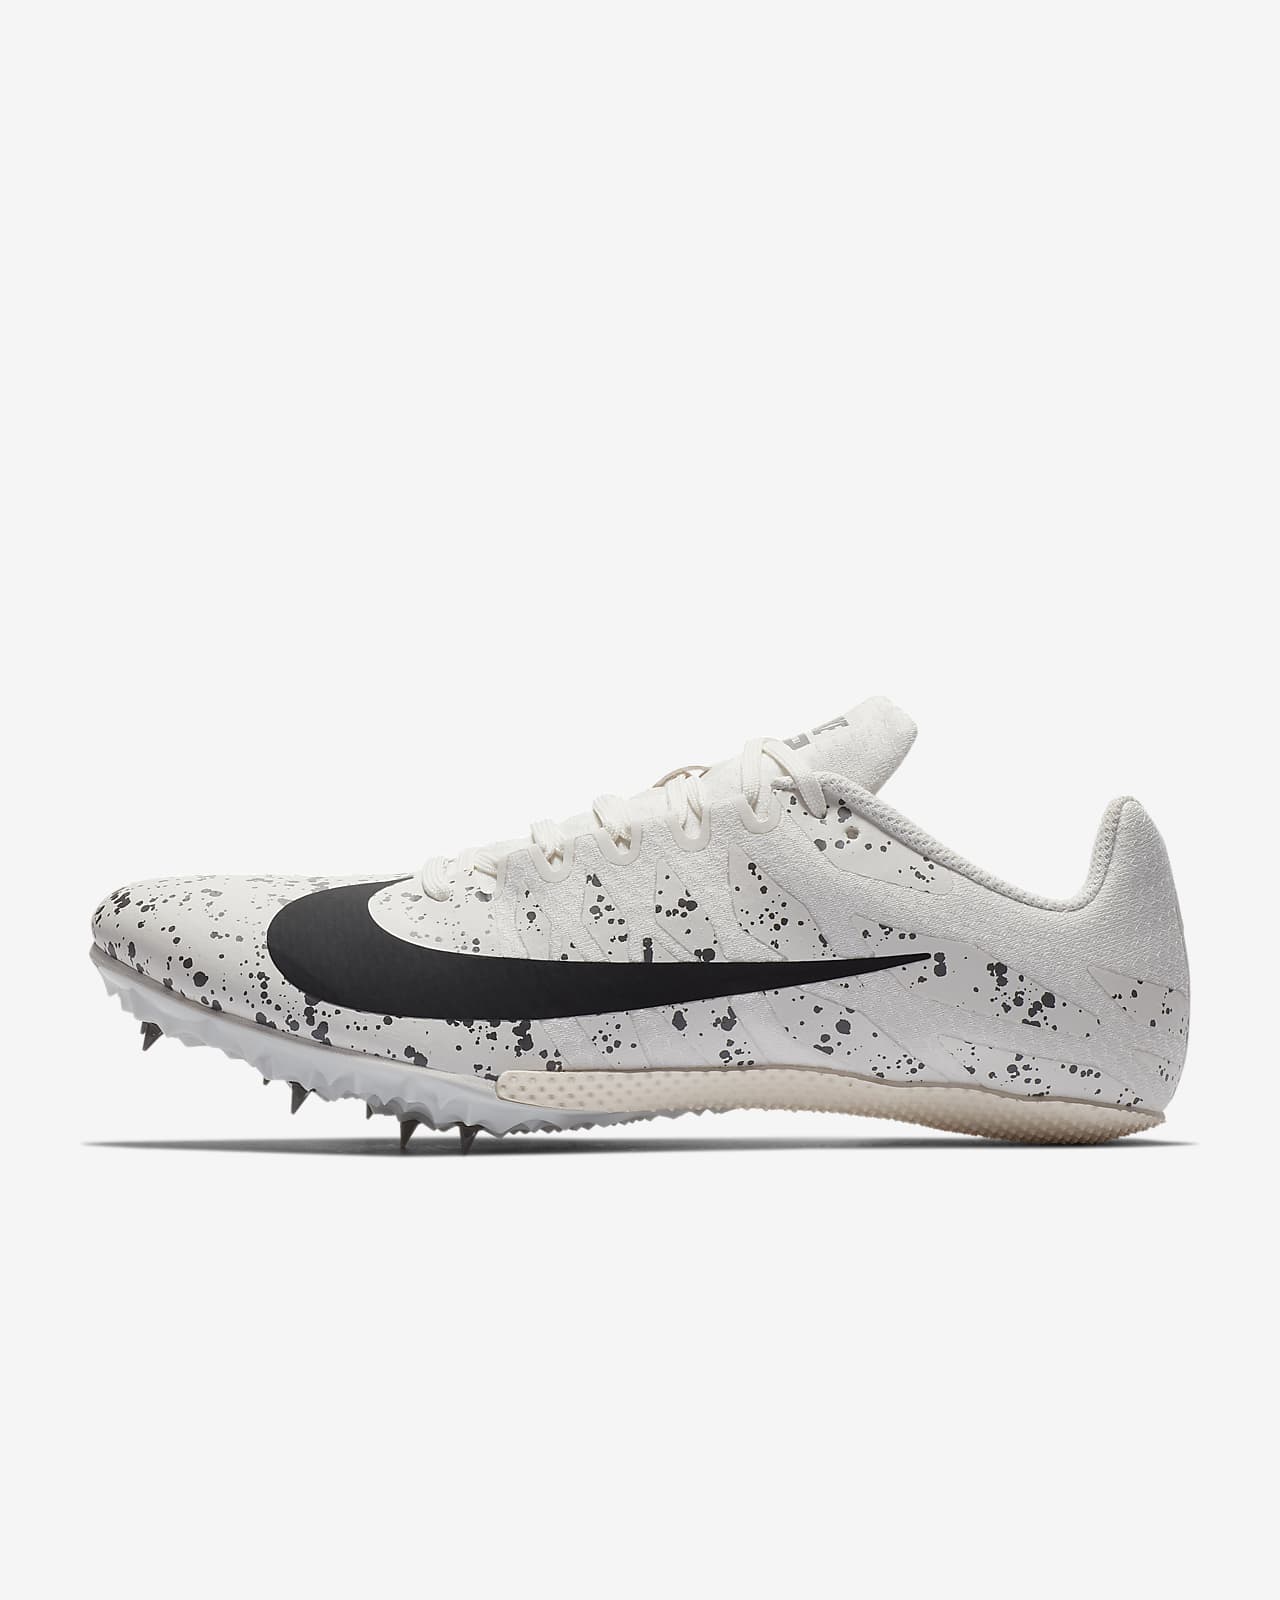 nike zoom rival s 9 unisex track spike